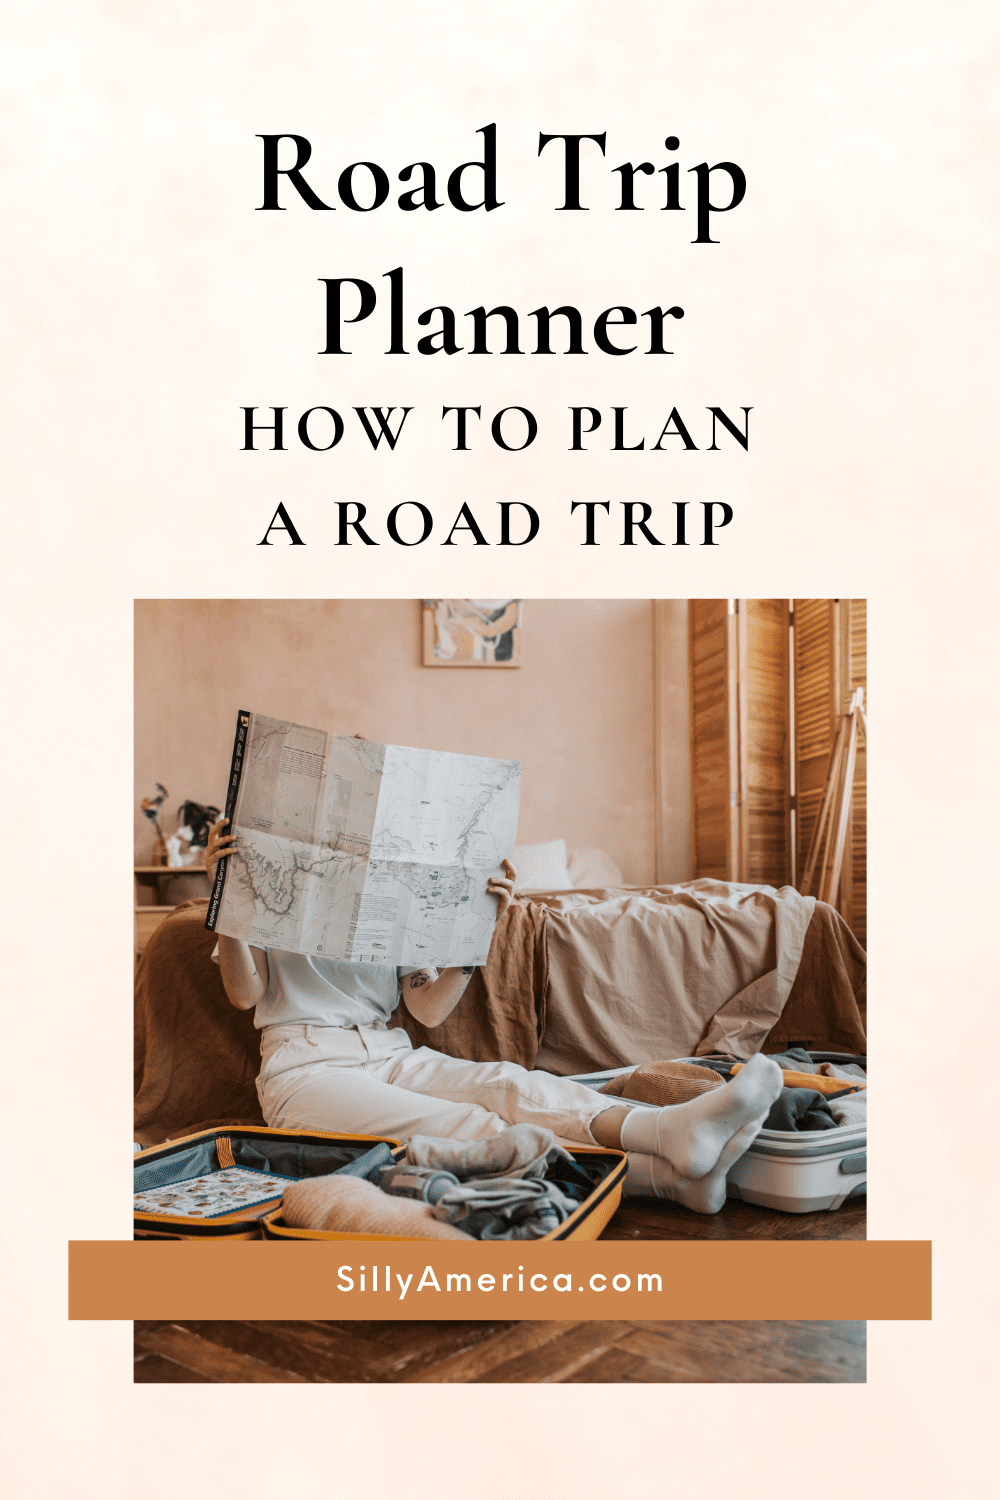 Planning a road trip can be fun, but daunting. You're going to want a plan. This road trip planner walks you through all of the things you need to think about before and during your trip to have the best time possible. You'll find information on how to plan a road trip with multiple stops, what to pack, and everything to see and do! Use our best road trip planner guides and road trip planning tools to make sure you get to your destination and back with no bumps in the road! #RoadTripPlanner